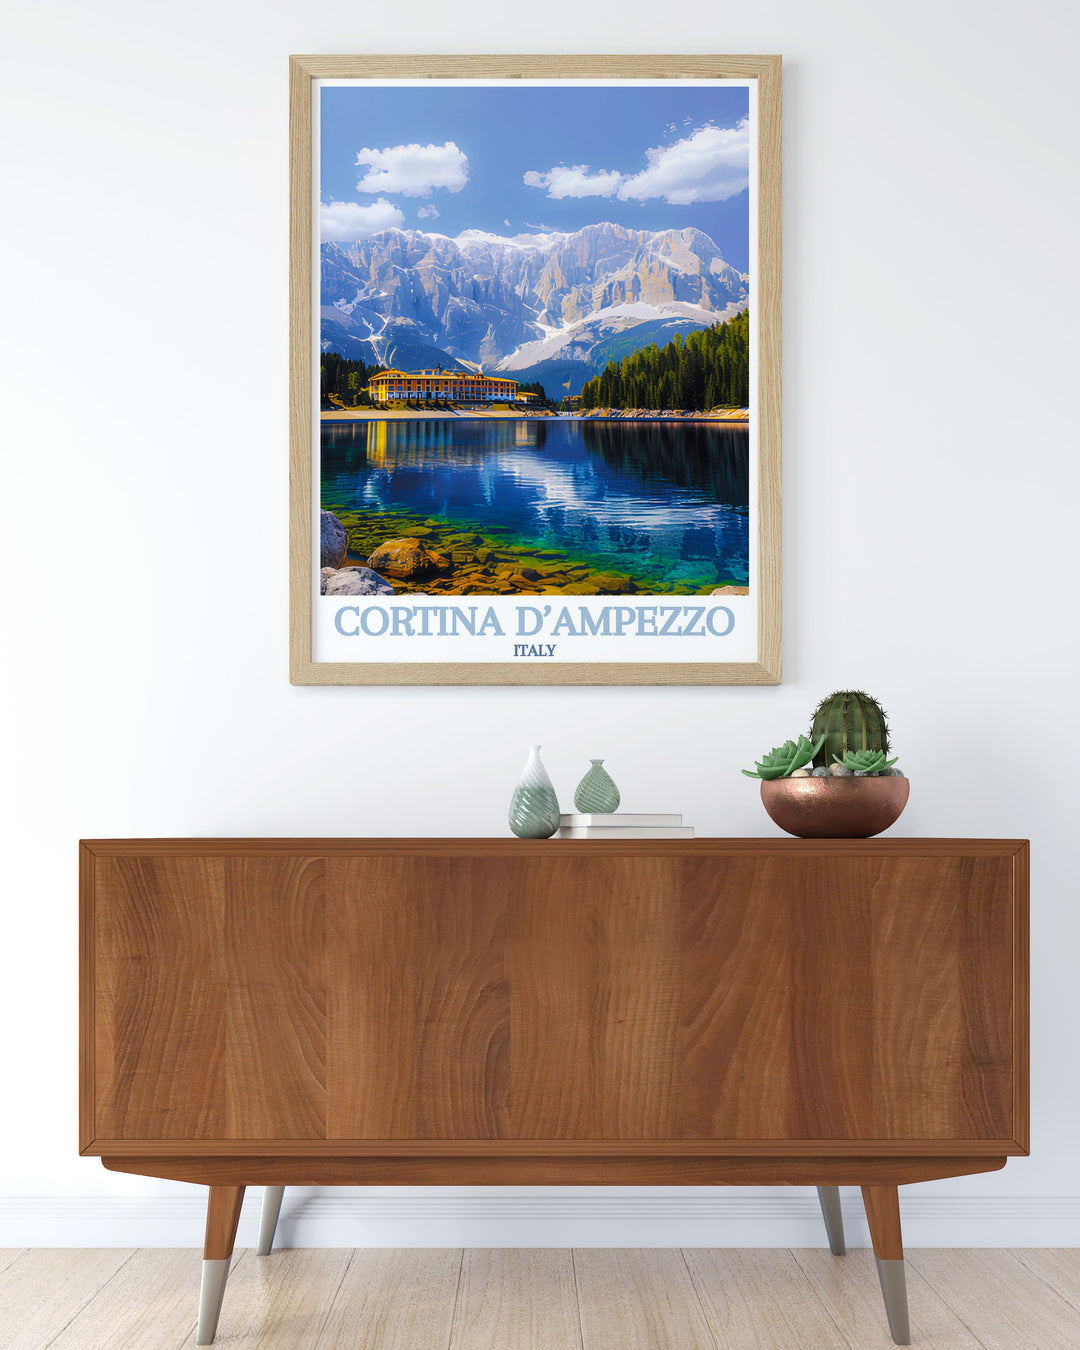 Immerse yourself in the breathtaking scenery of Lake Misurina with our high quality prints. Highlighting the crystal clear waters and surrounding Dolomite peaks, these artworks bring the tranquility and majesty of this iconic Italian destination into any living space.